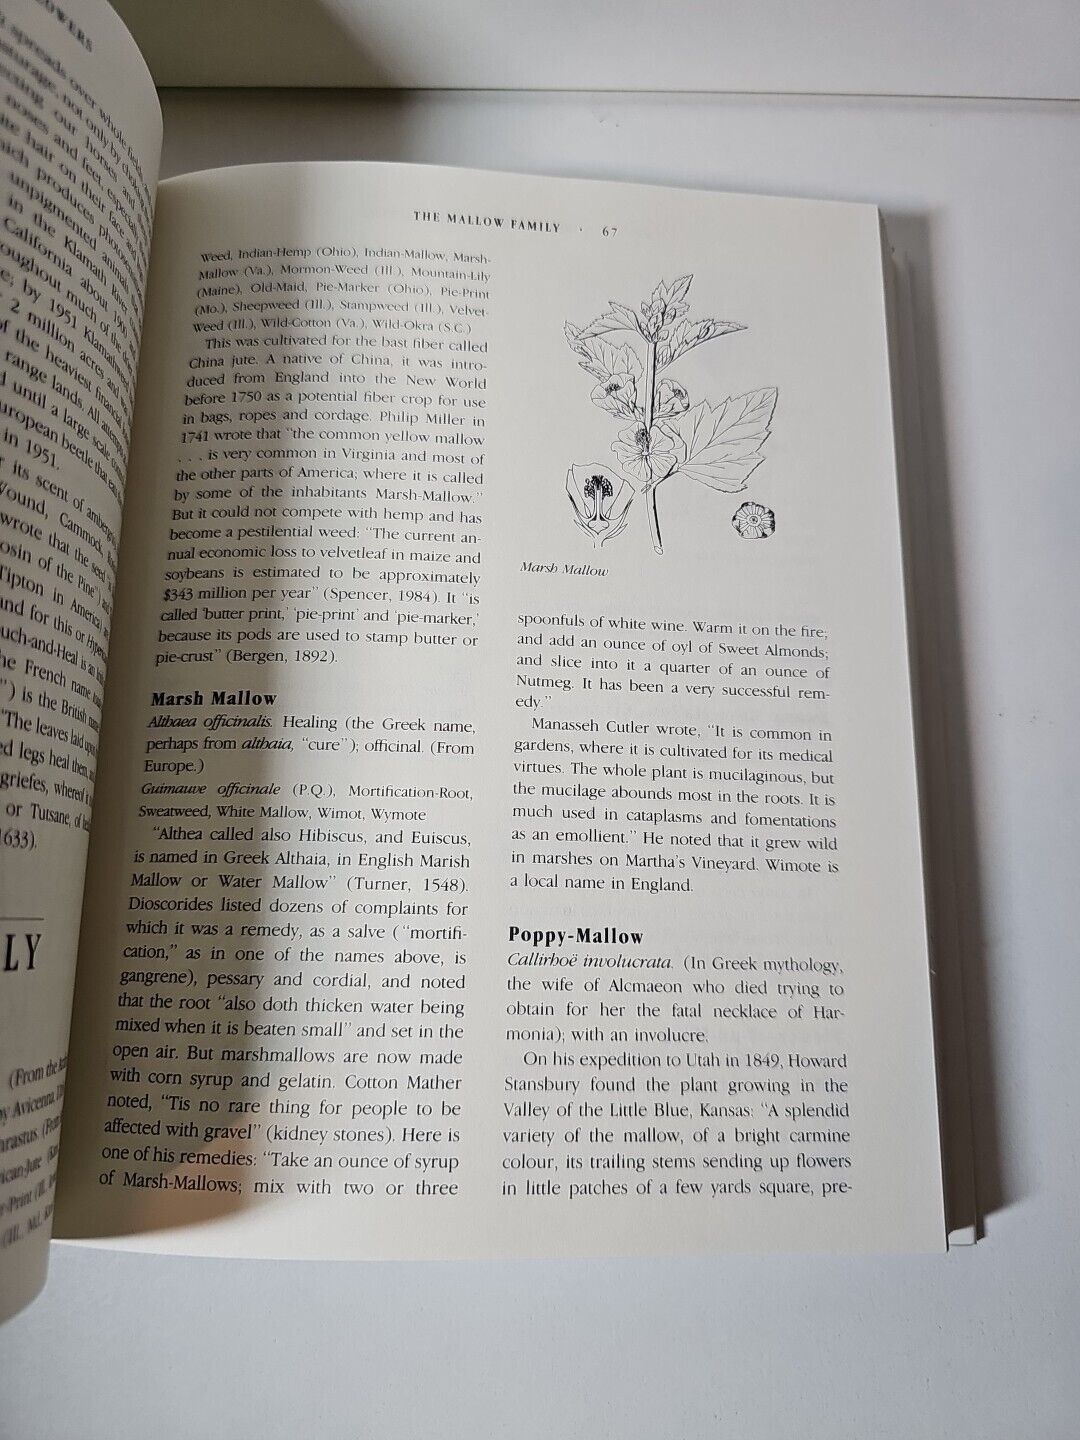 The History and Folklore of North American Wildflowers by T. Coffey (1993)